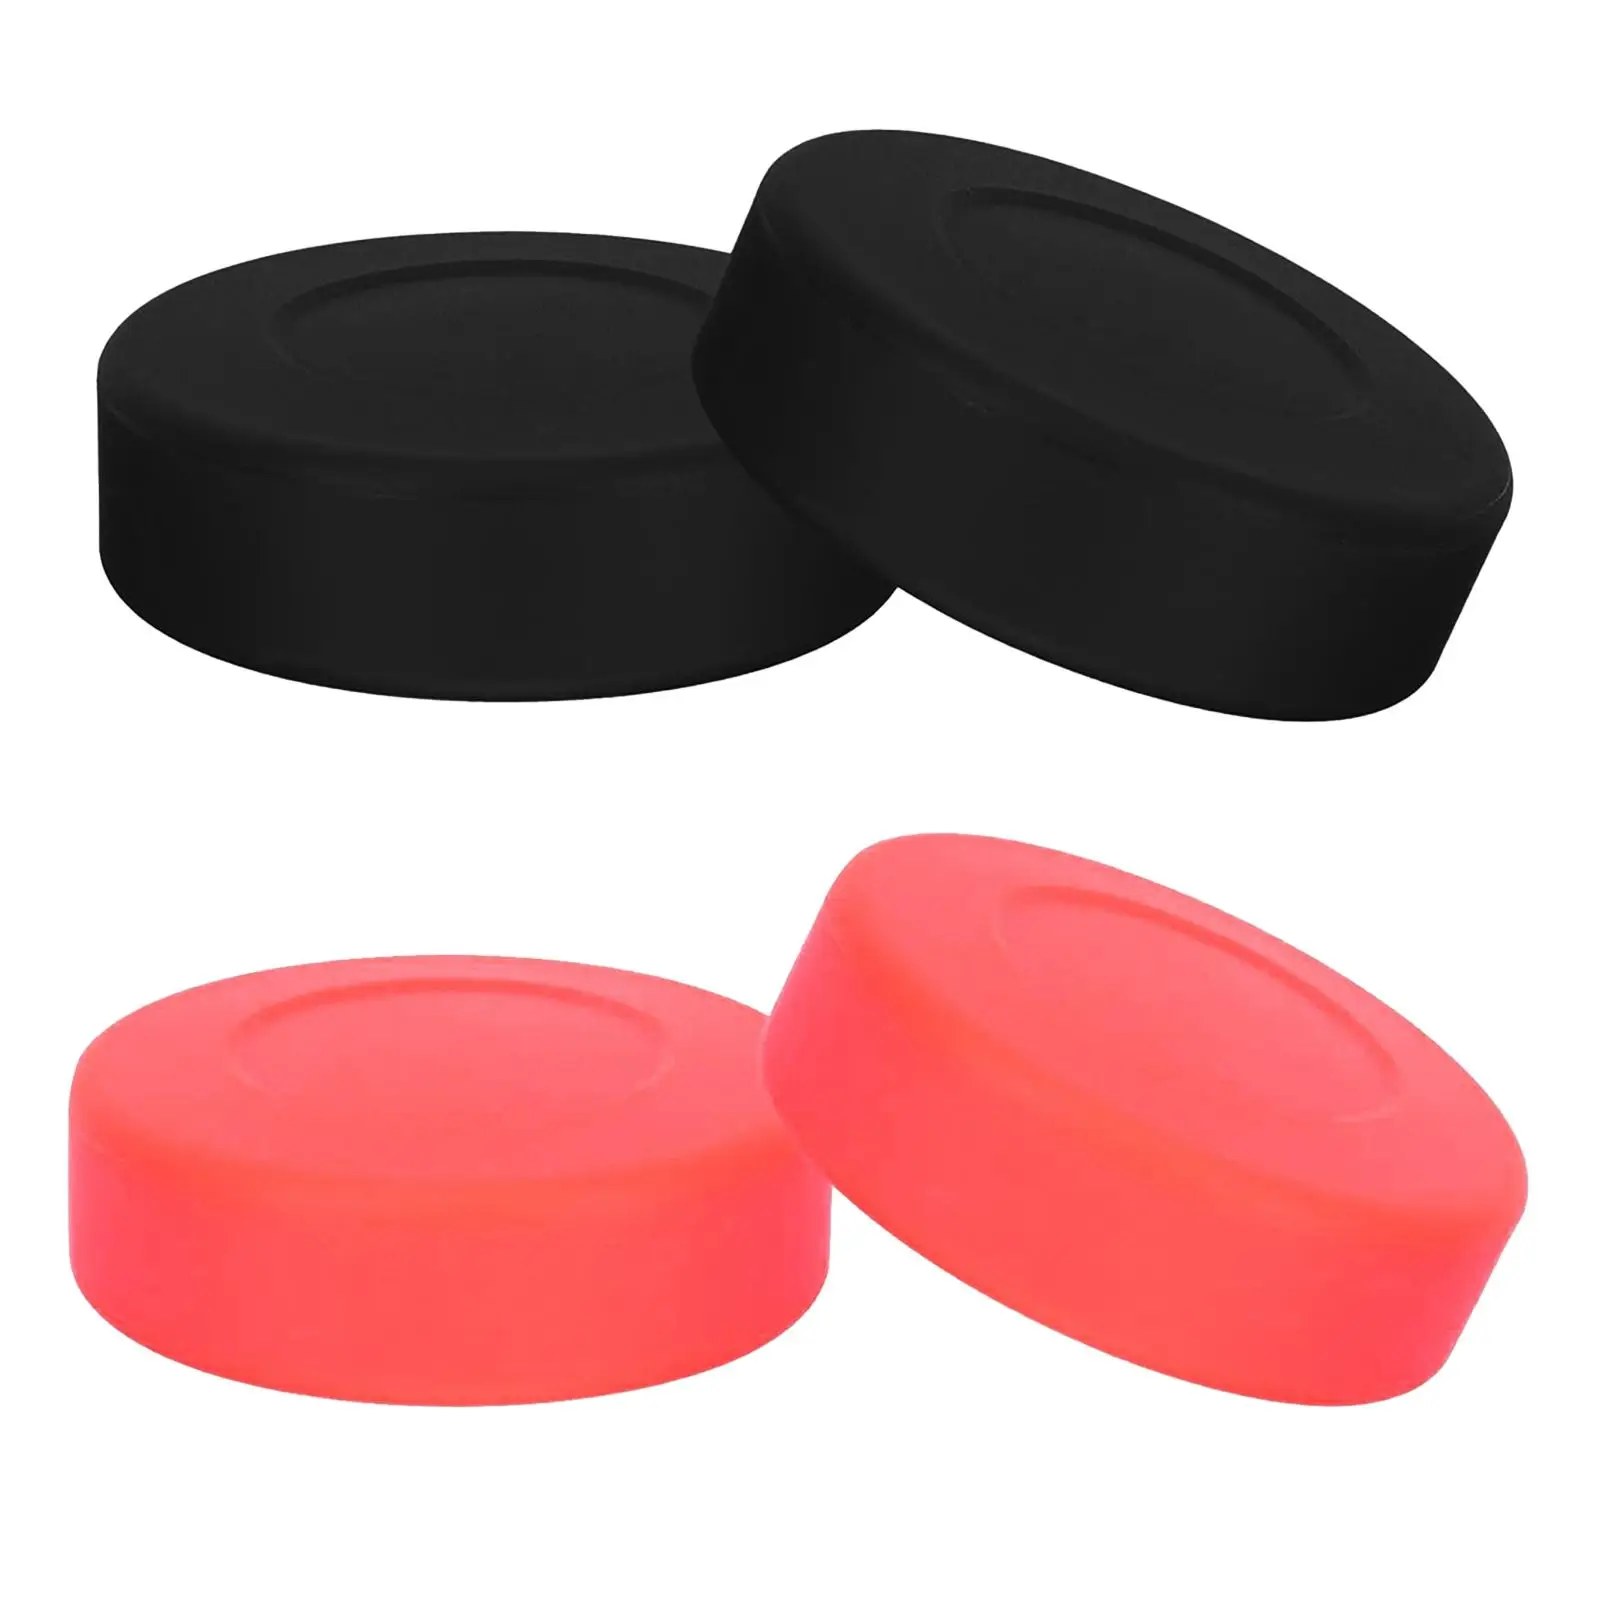 2 Pieces Ice Hockey Puck Multipurpose Sturdy Simple to Use Hockey Ball for Athletes Children Starters Competition Training